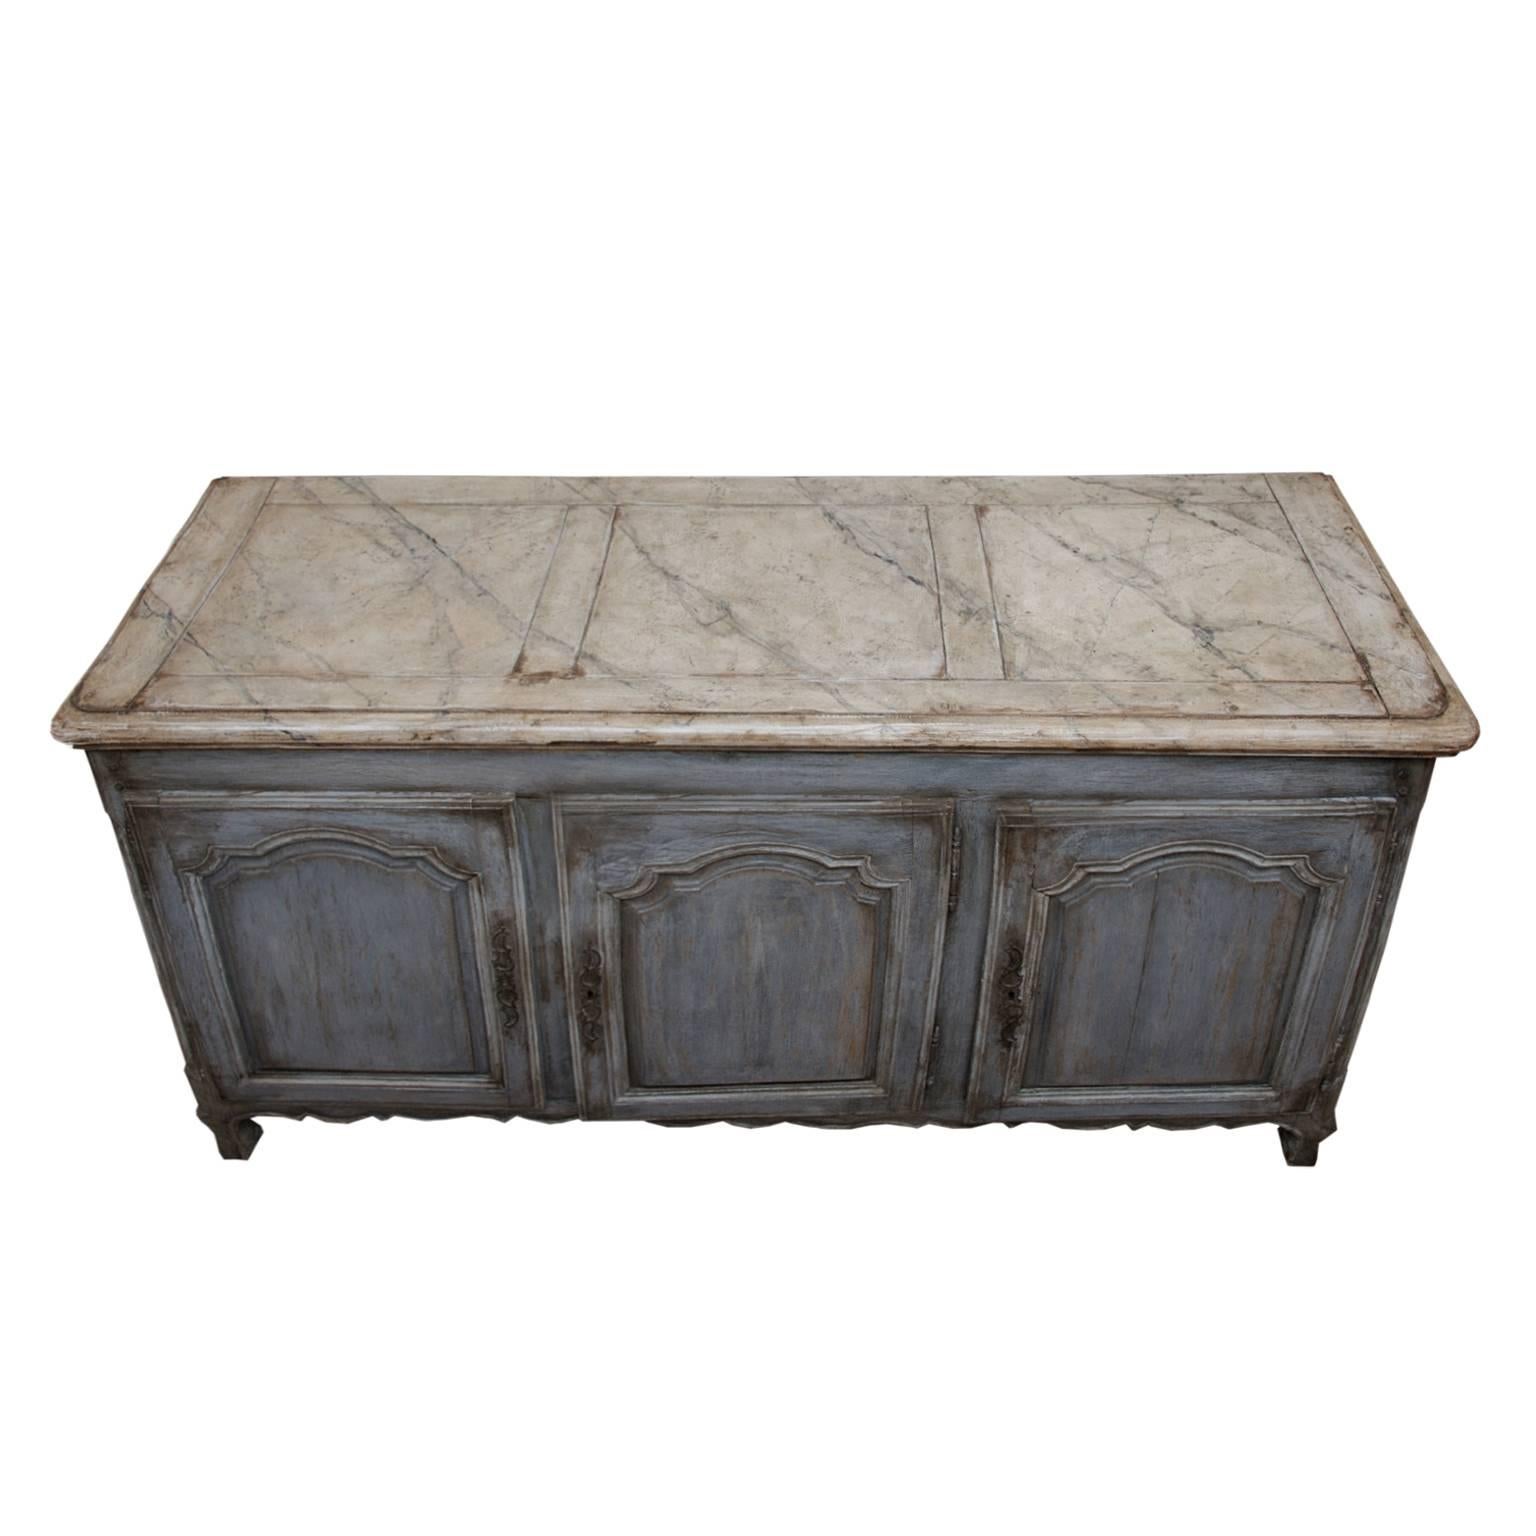 This is a really stylish and generously proportioned French mid-18th century Louis XV grey painted three door enfilade dresser with faux marble painted top (paintwork refreshed), circa 1750.